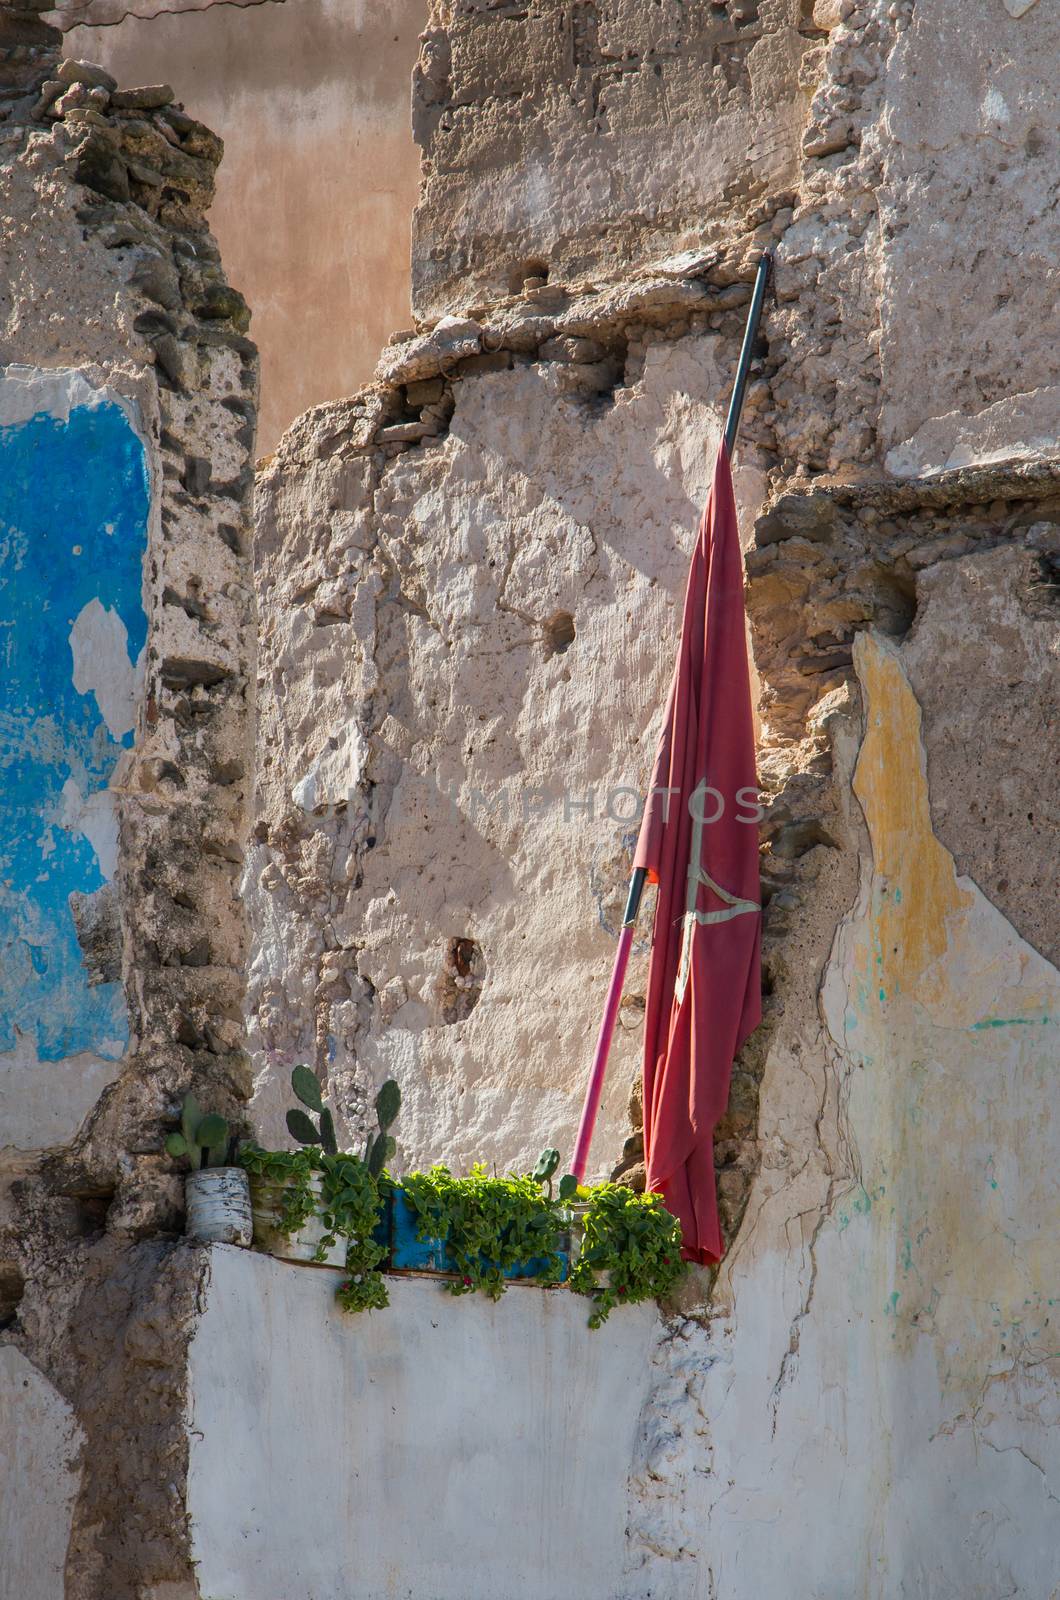 Ruins of an old demolished house. Structure of the walls remaining. Moroccan flag and fresh plants in the pots.